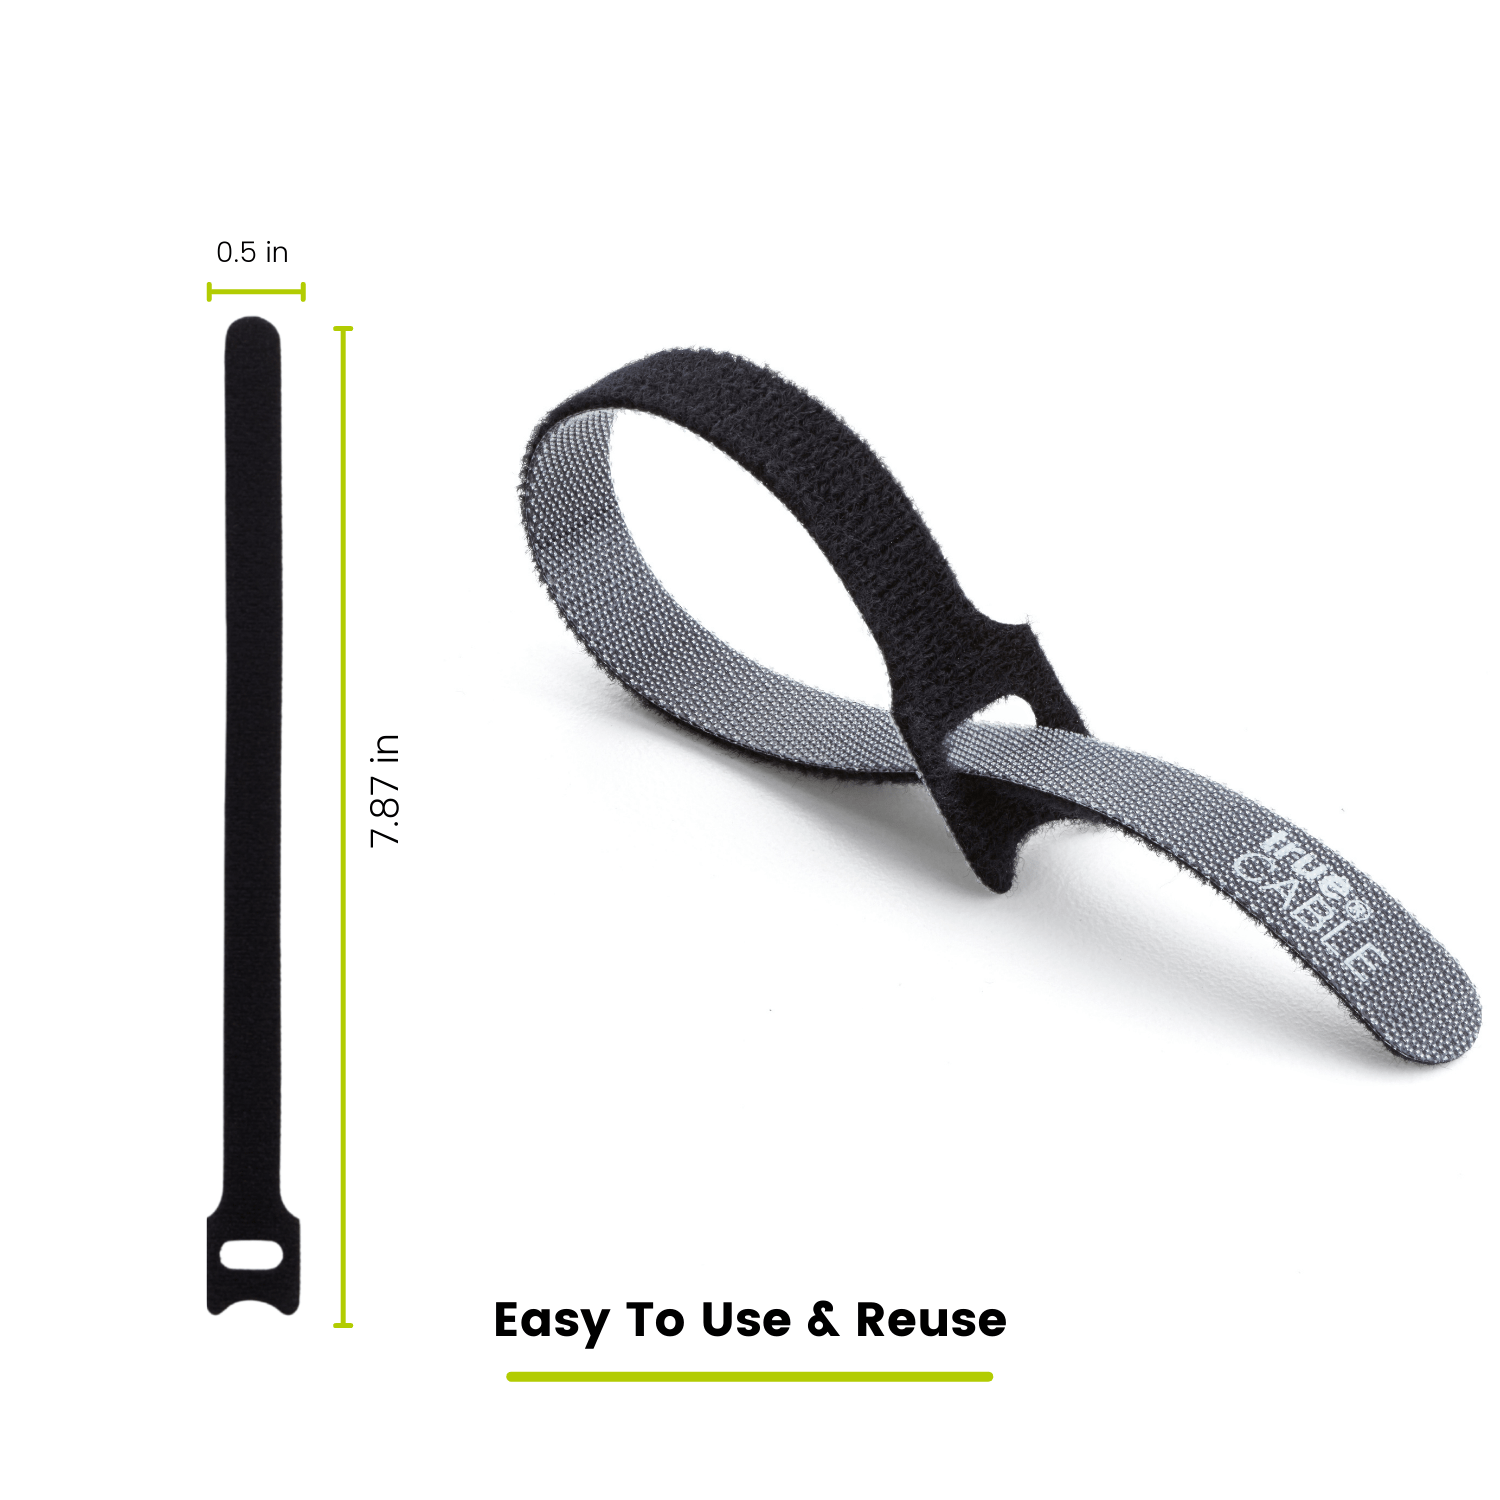 Get Plugged-in To Great Deals On Powerful Wholesale carbon fiber cord 